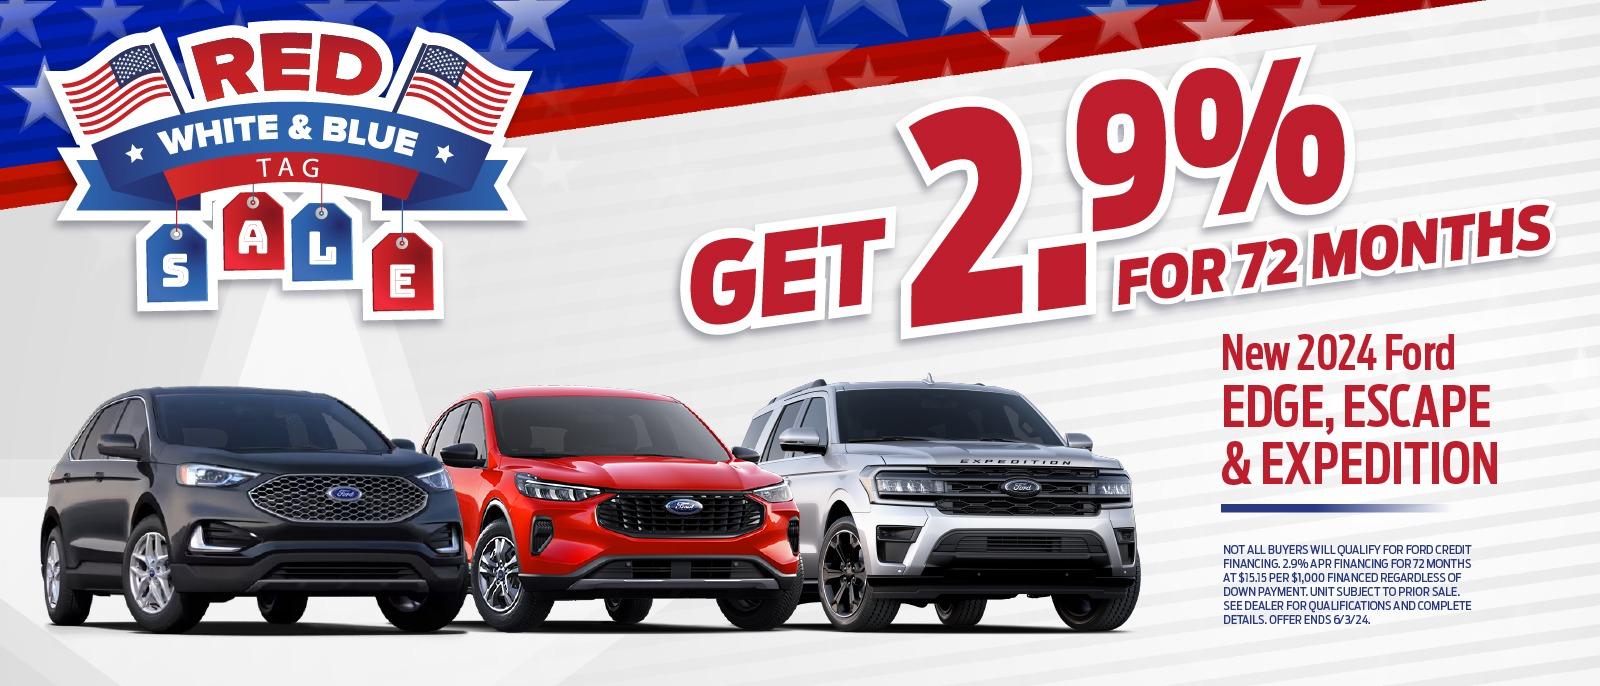 Red White & Blue Edge , Escape and Expedition 2.9% for 72 Months Special!🔖